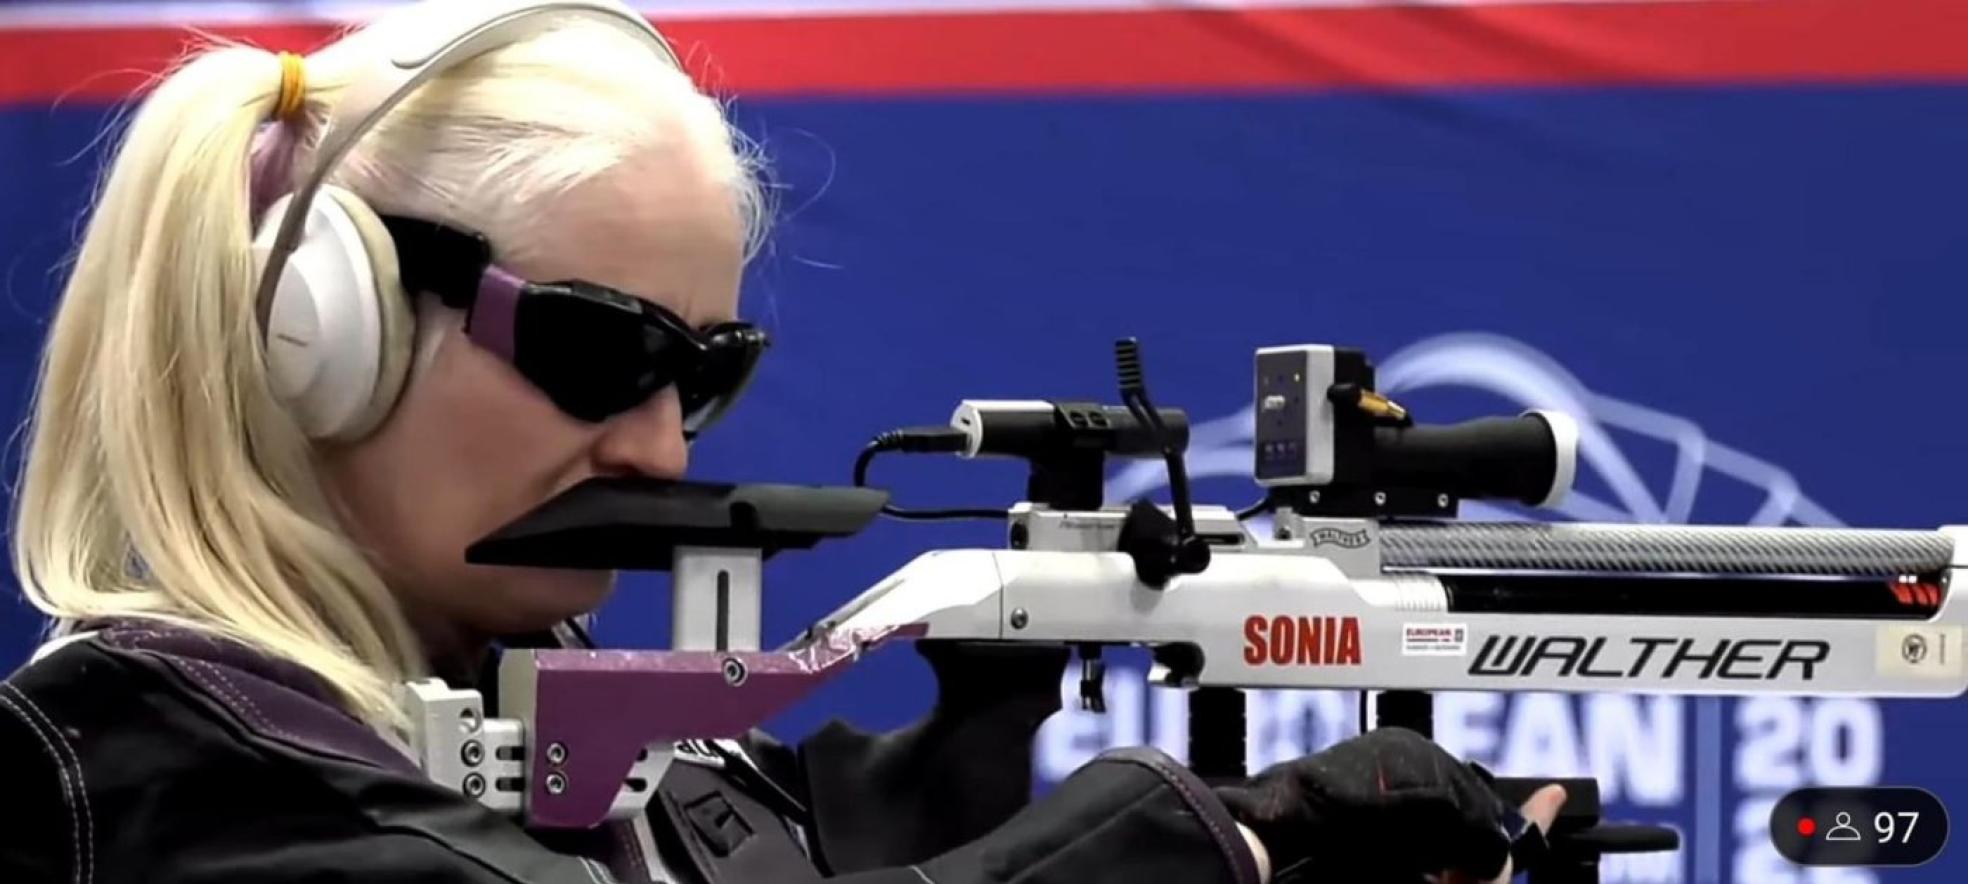 Sonia Rivero competing with her rifle at an event.